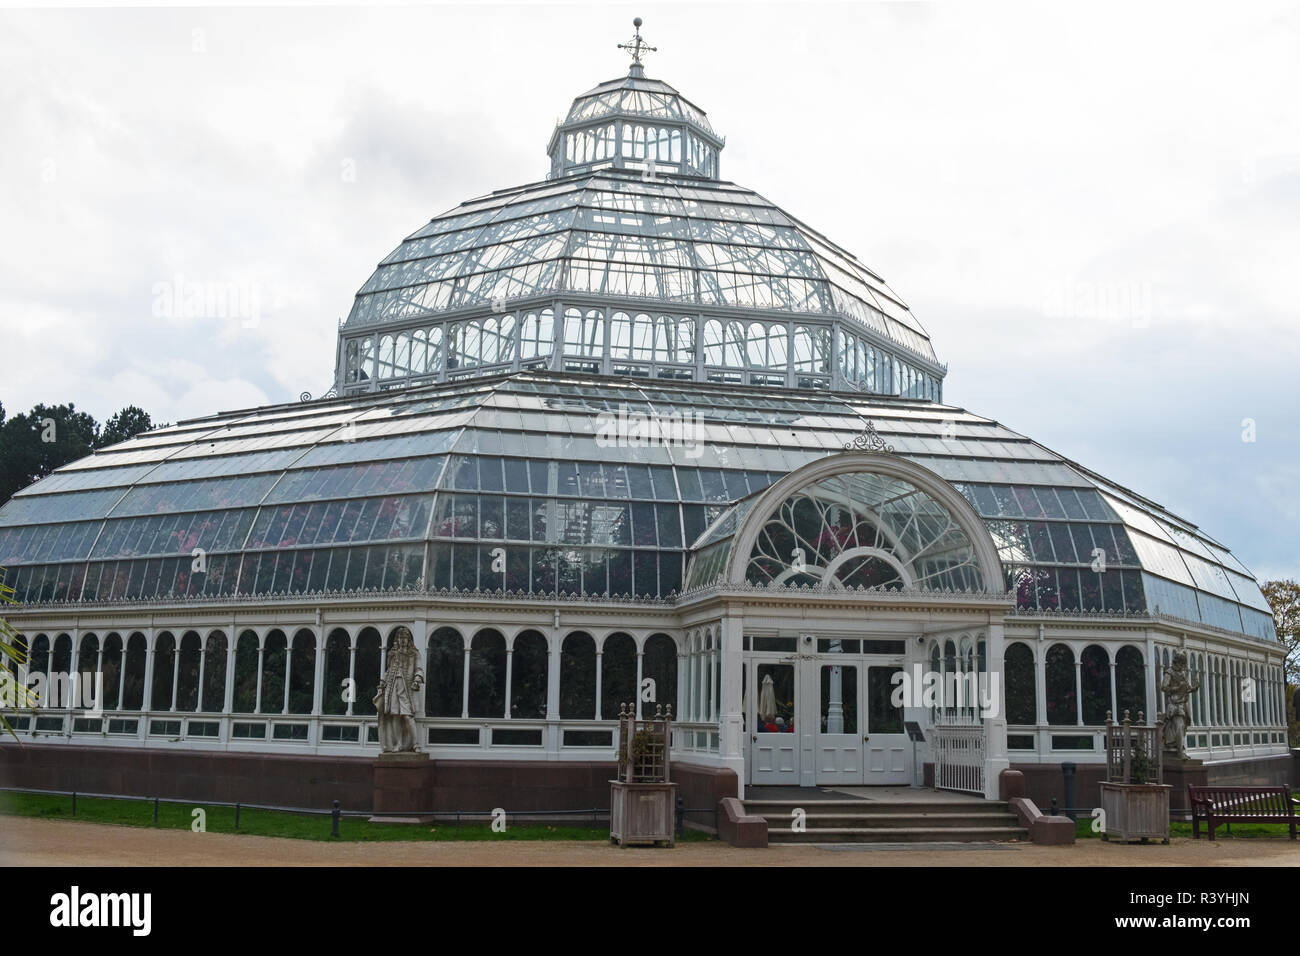 LIVERPOOL, ENGLAND - NOVEMBER 6, 2018: The Victorian Palm House at Sefton Park in the south of the city now used for hosting social events Stock Photo